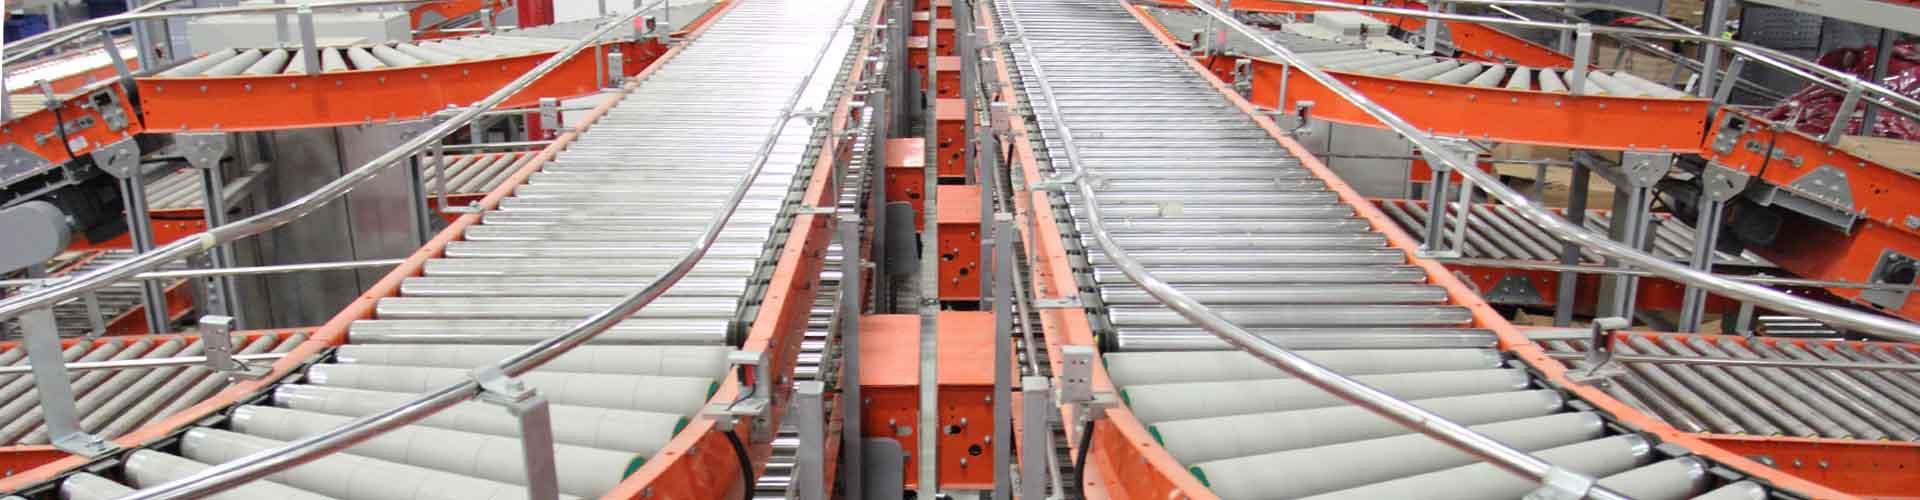 Poly Vee Driven Roller Conveyors